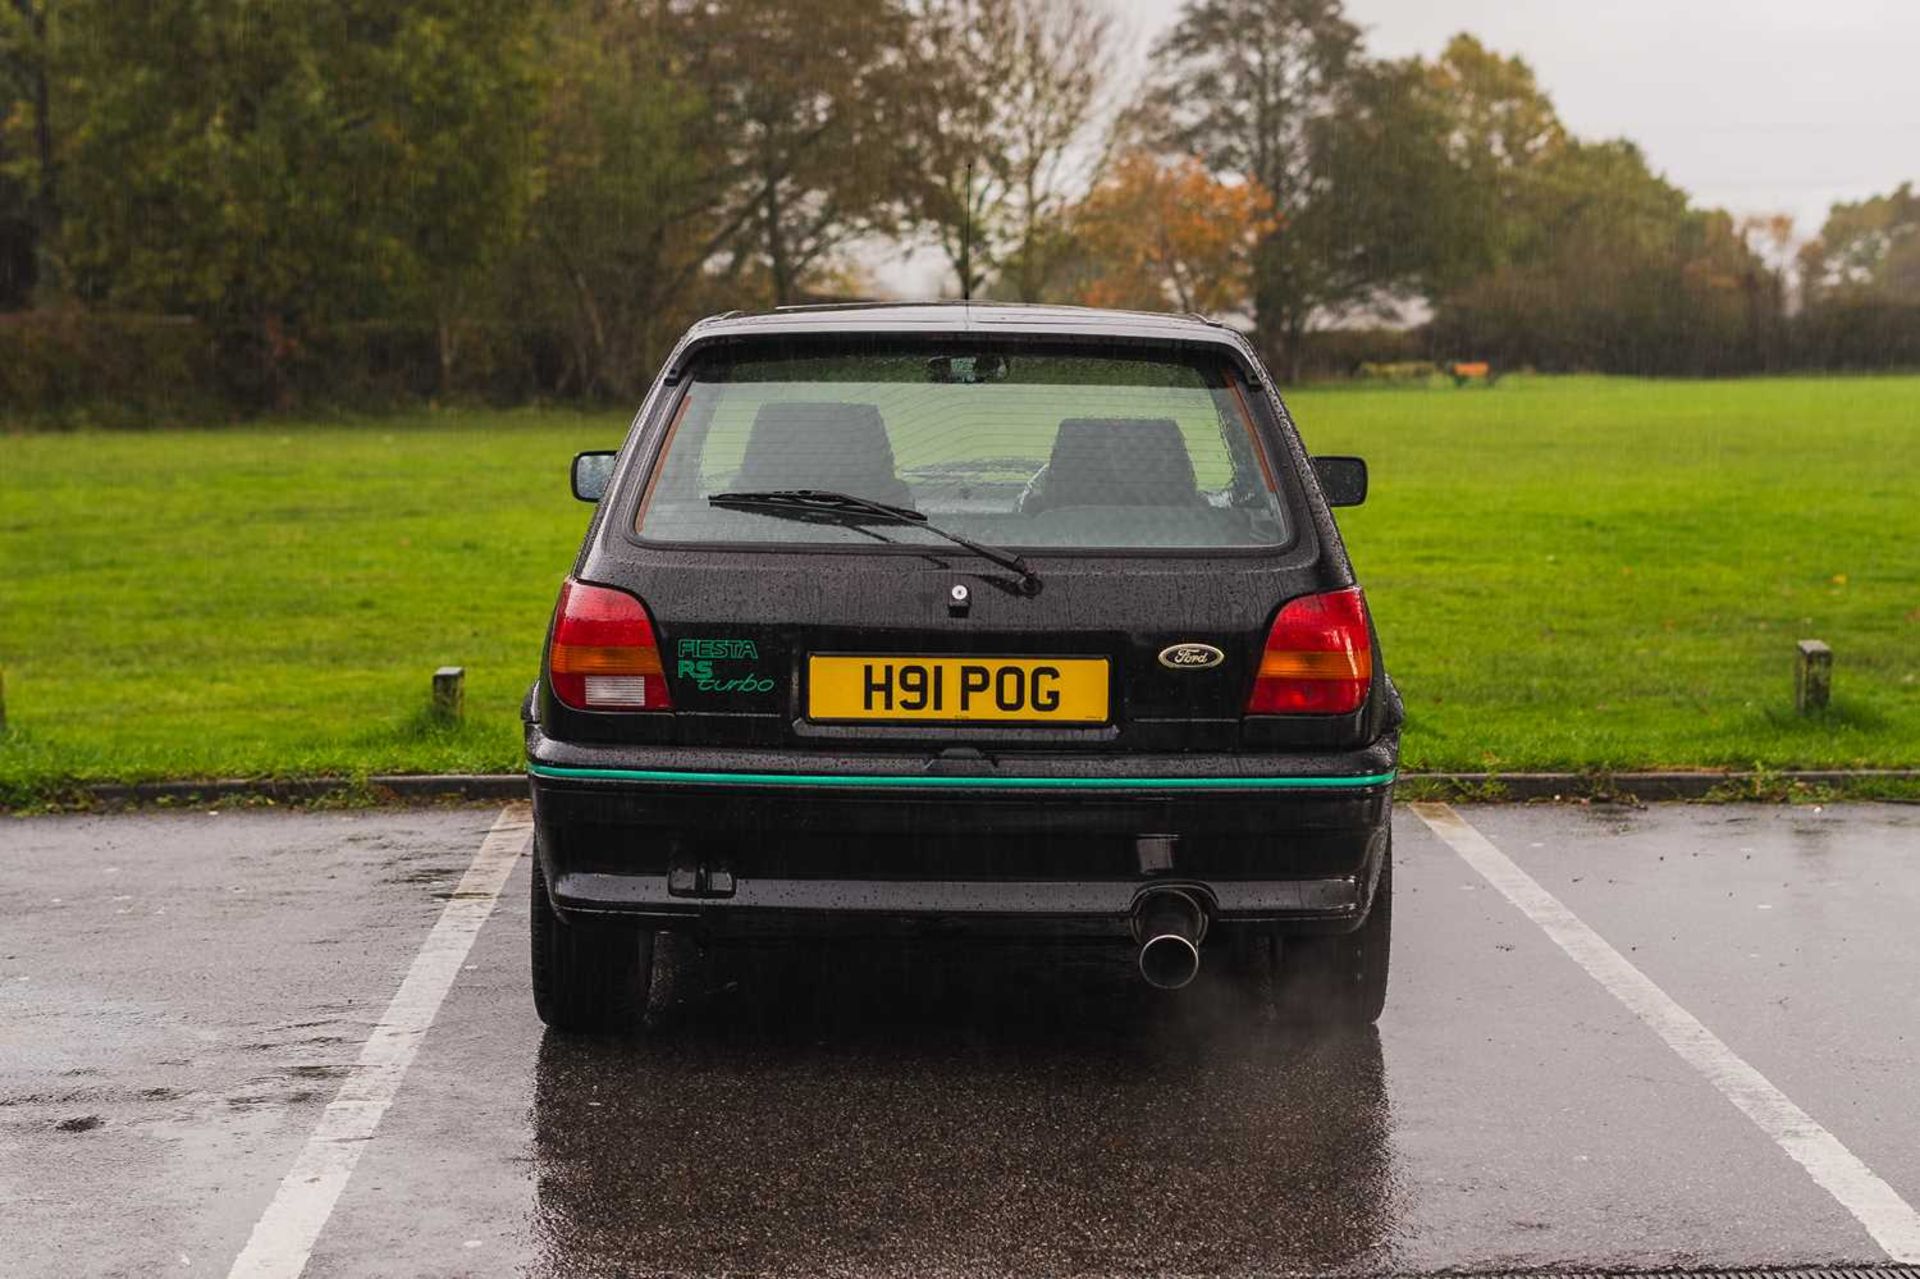 1991 Ford Fiesta RS Turbo Largely-original, save for the fitment of Mondeo-type alloy wheels  - Image 9 of 45